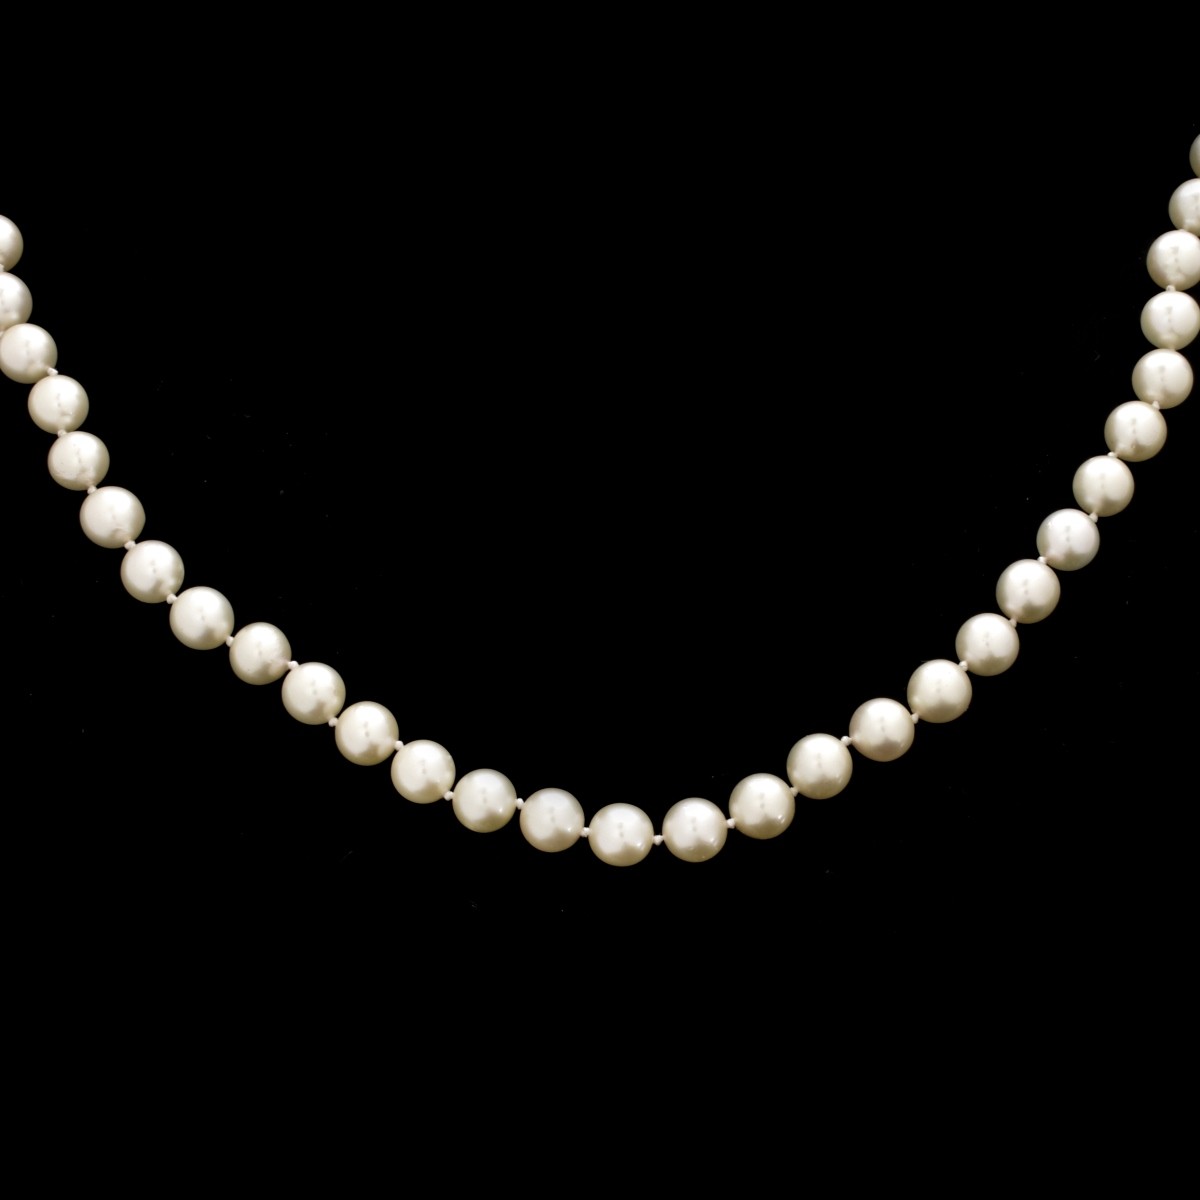 7.5-8.0mm Pearl Necklace